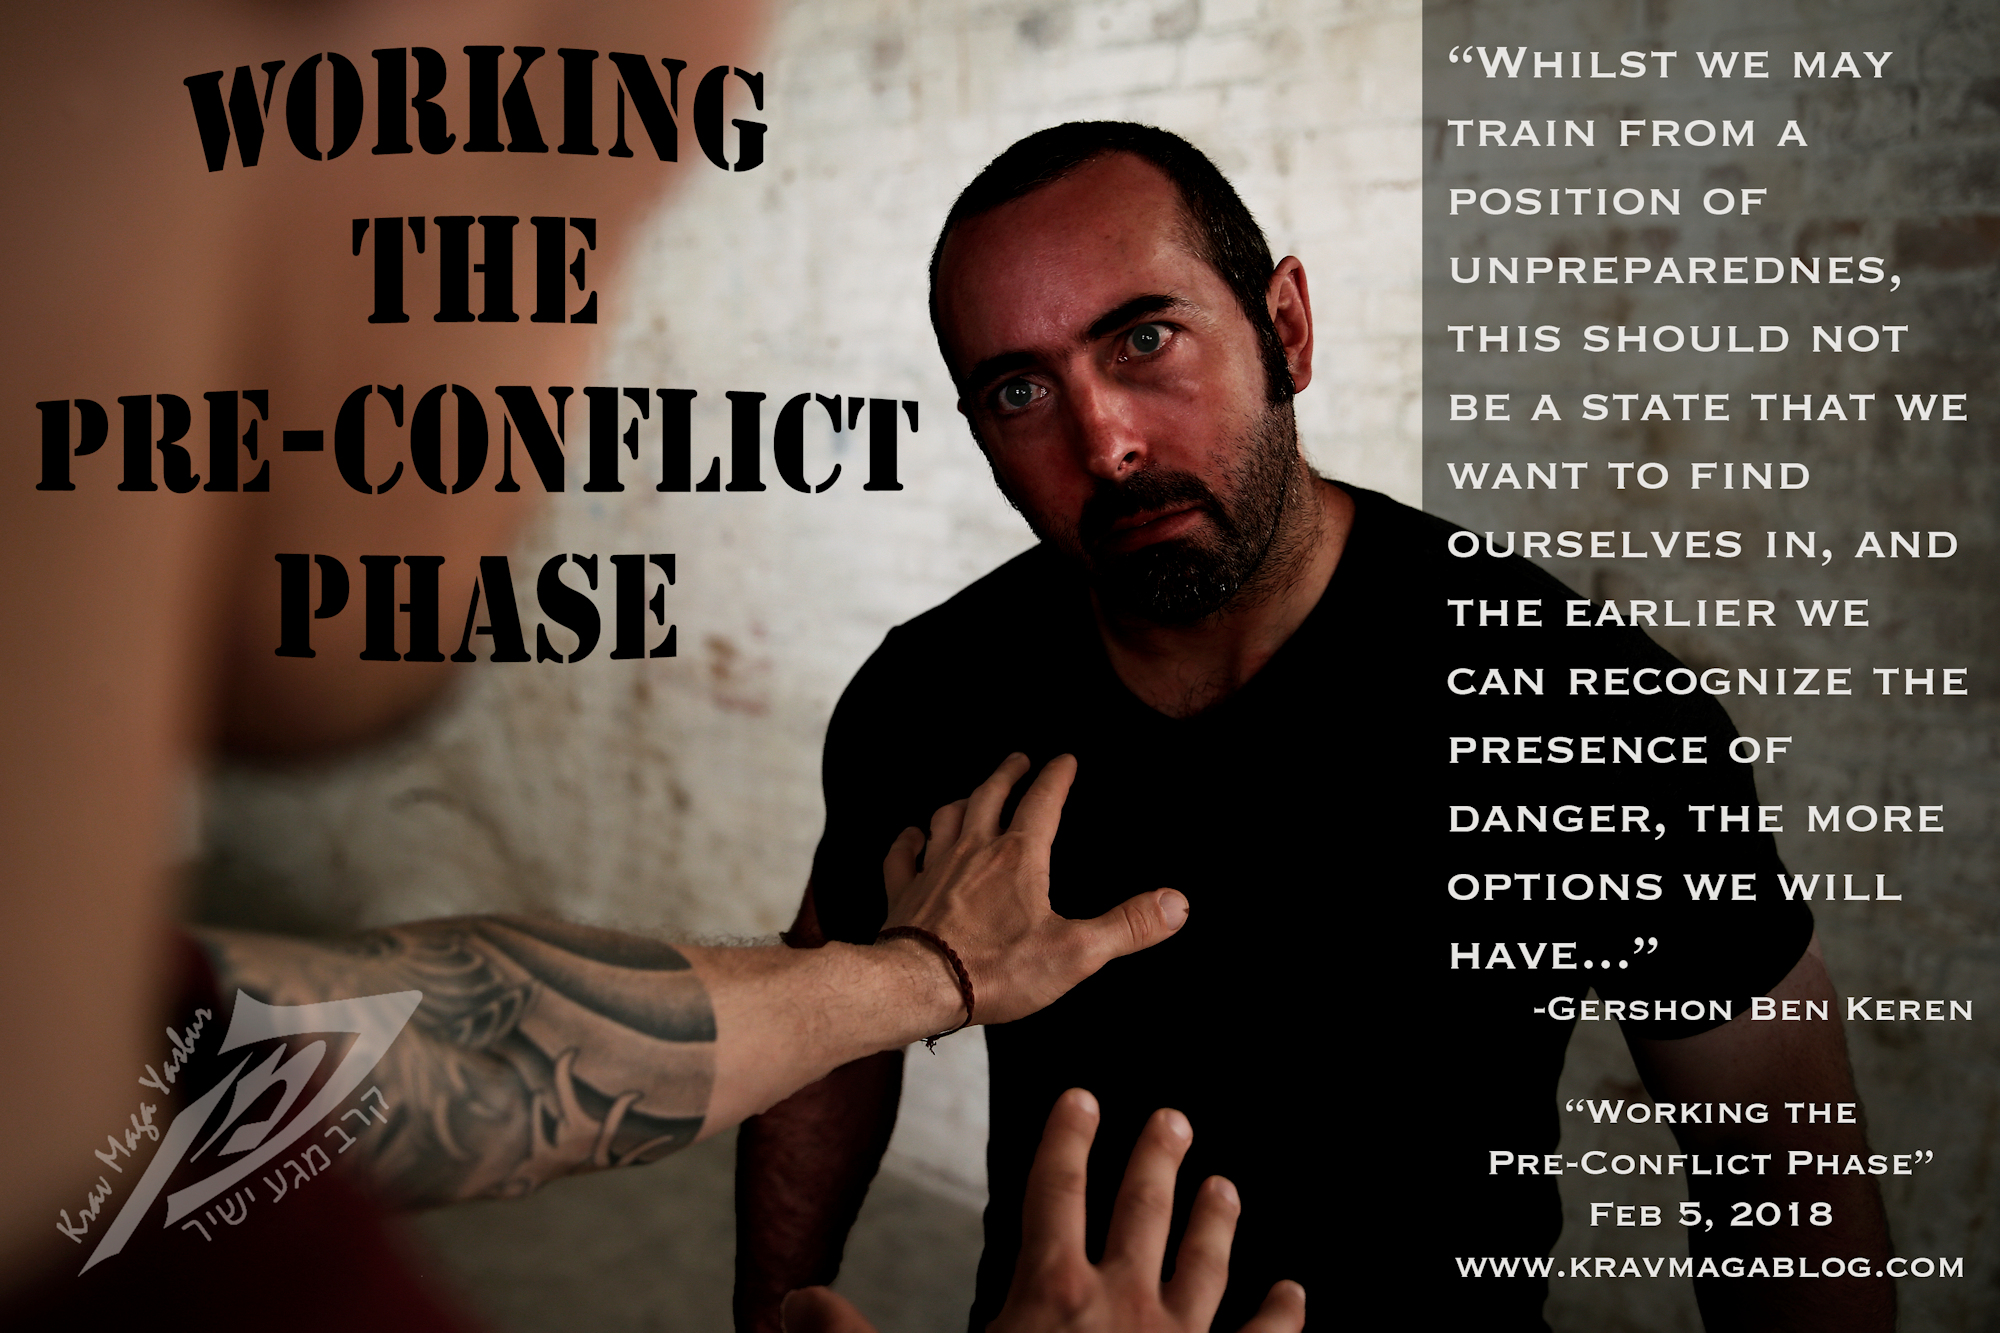 Blog About Working The Pre-Conflict Phase